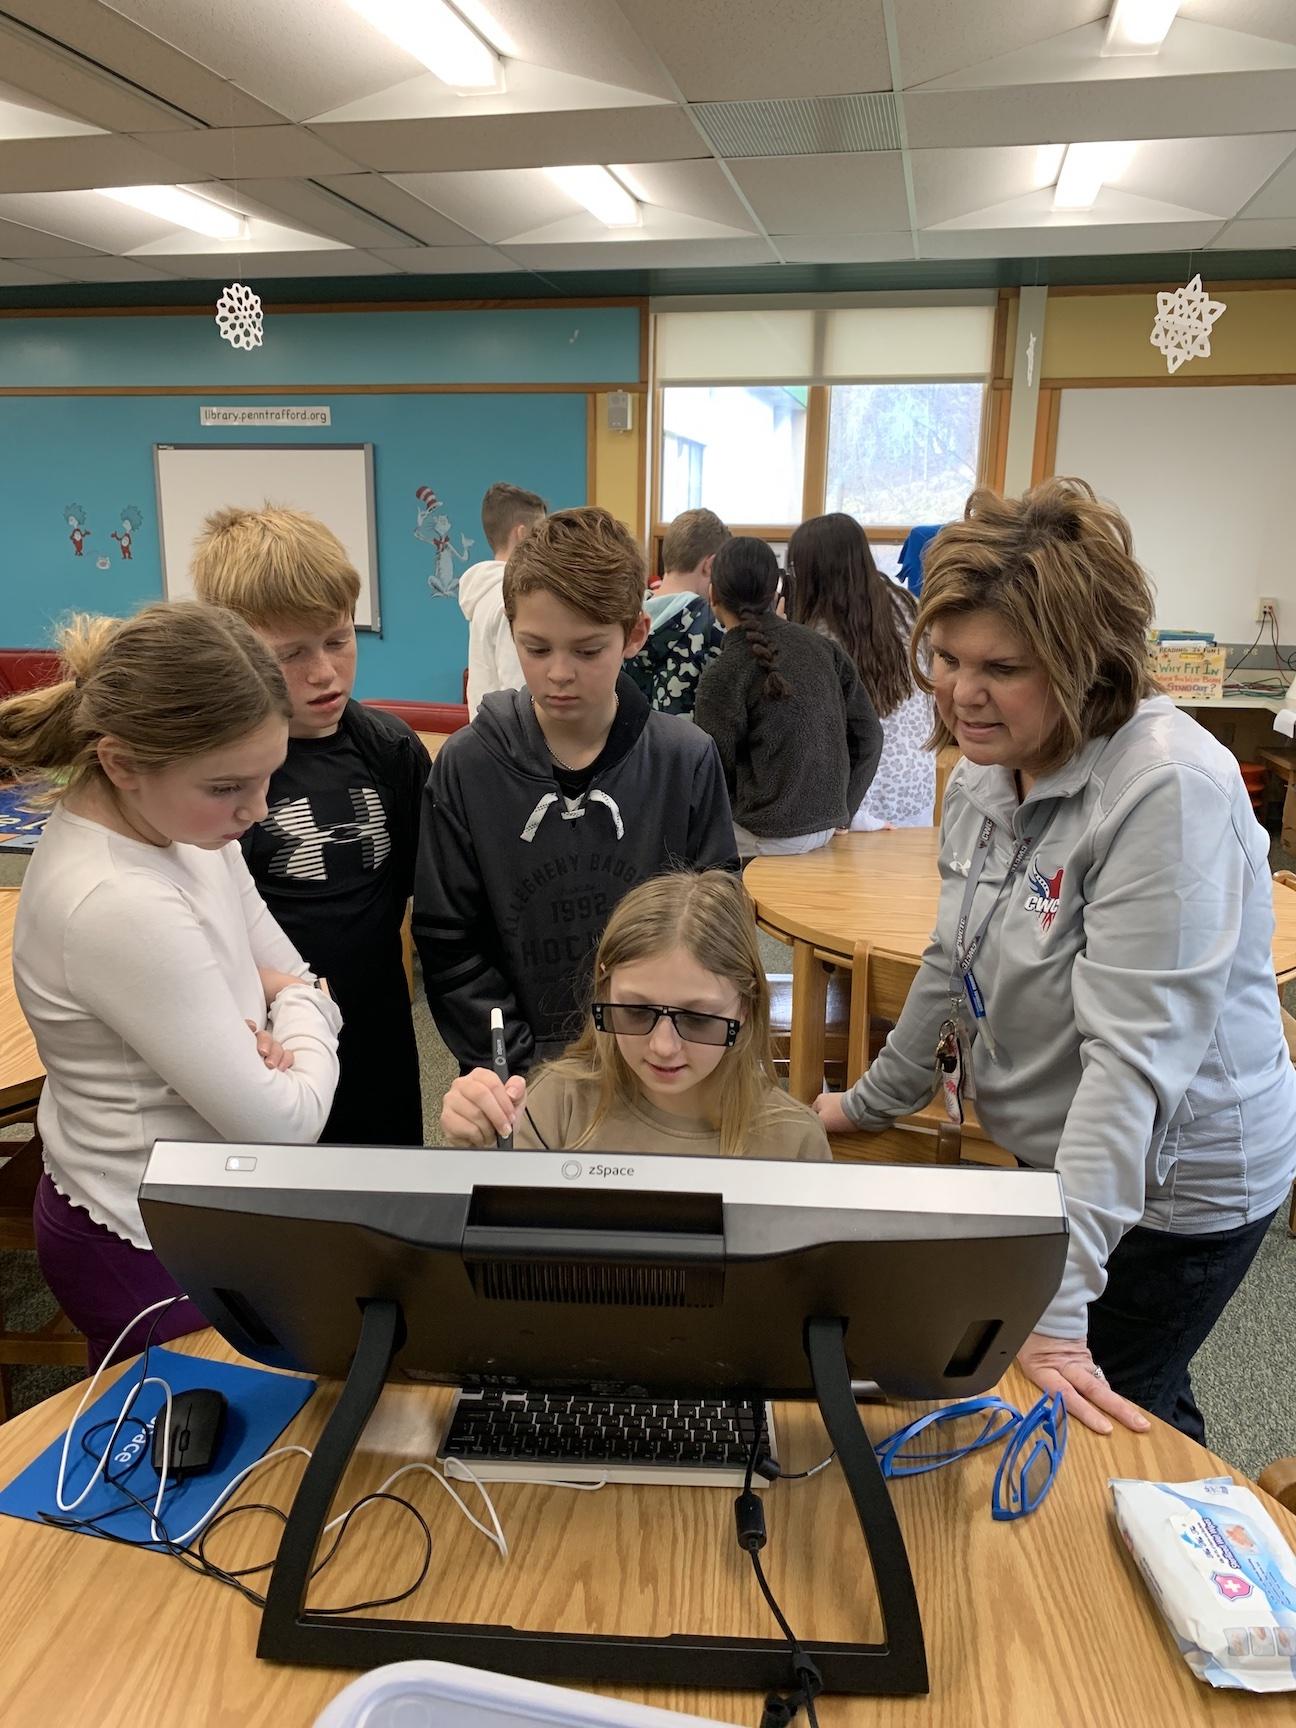 Harrison Park student, Natalie Sterner, overseen by CWCTC staff member, Darlene Patrick, uses the 3D computer zSpace while Ella Hileman, Dominic Capezzuto, and Chase Crawford watch